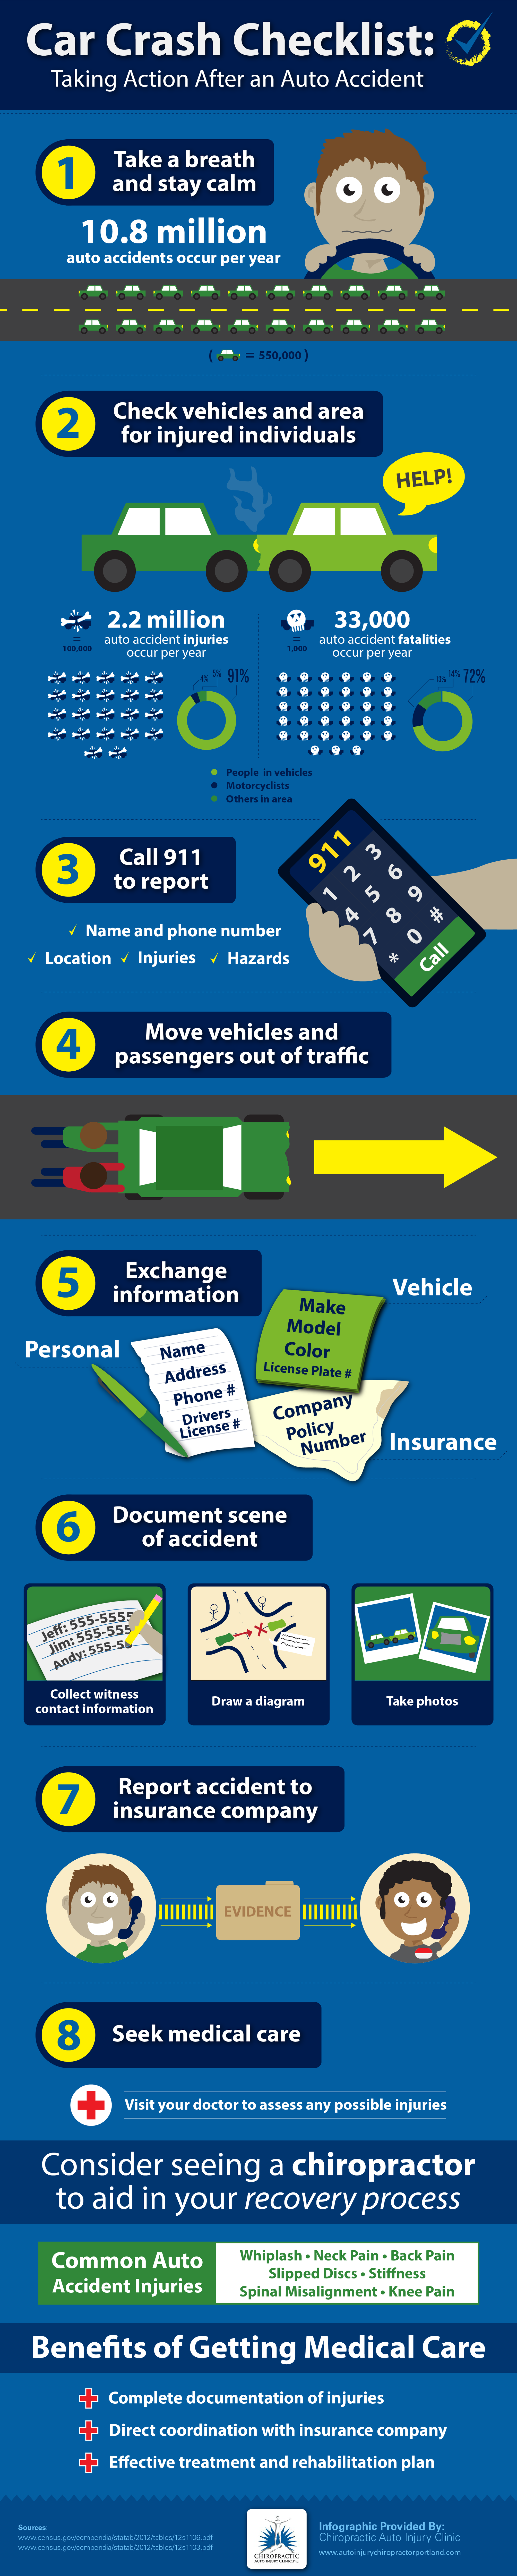 Car Crash Checklist: Taking Action After an Auto Accident 